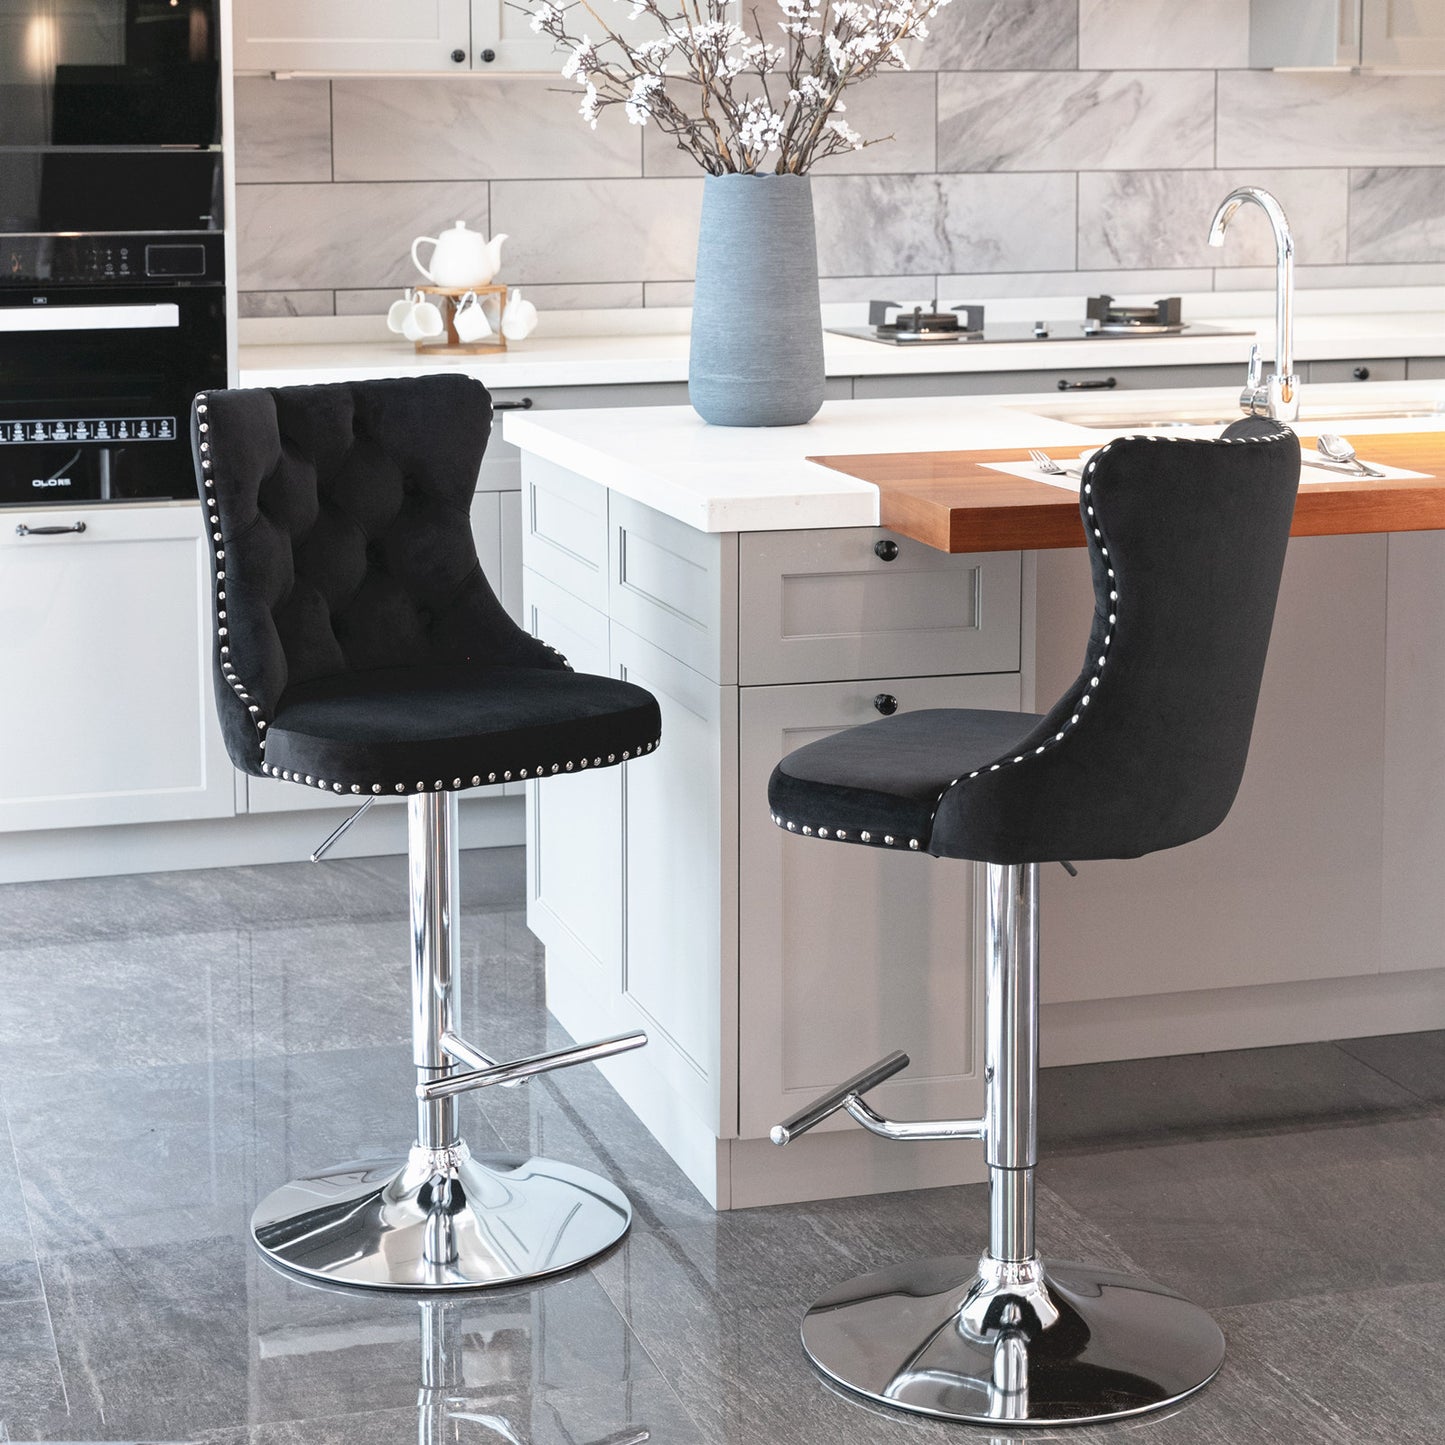 A&A Furniture,Swivel Velvet Barstools Adjusatble Seat Height from 25-33 Inch, Modern Upholstered Chrome base Bar Stools with Backs Comfortable Tufted for Home Pub and Kitchen Island（Black,Set of 2）